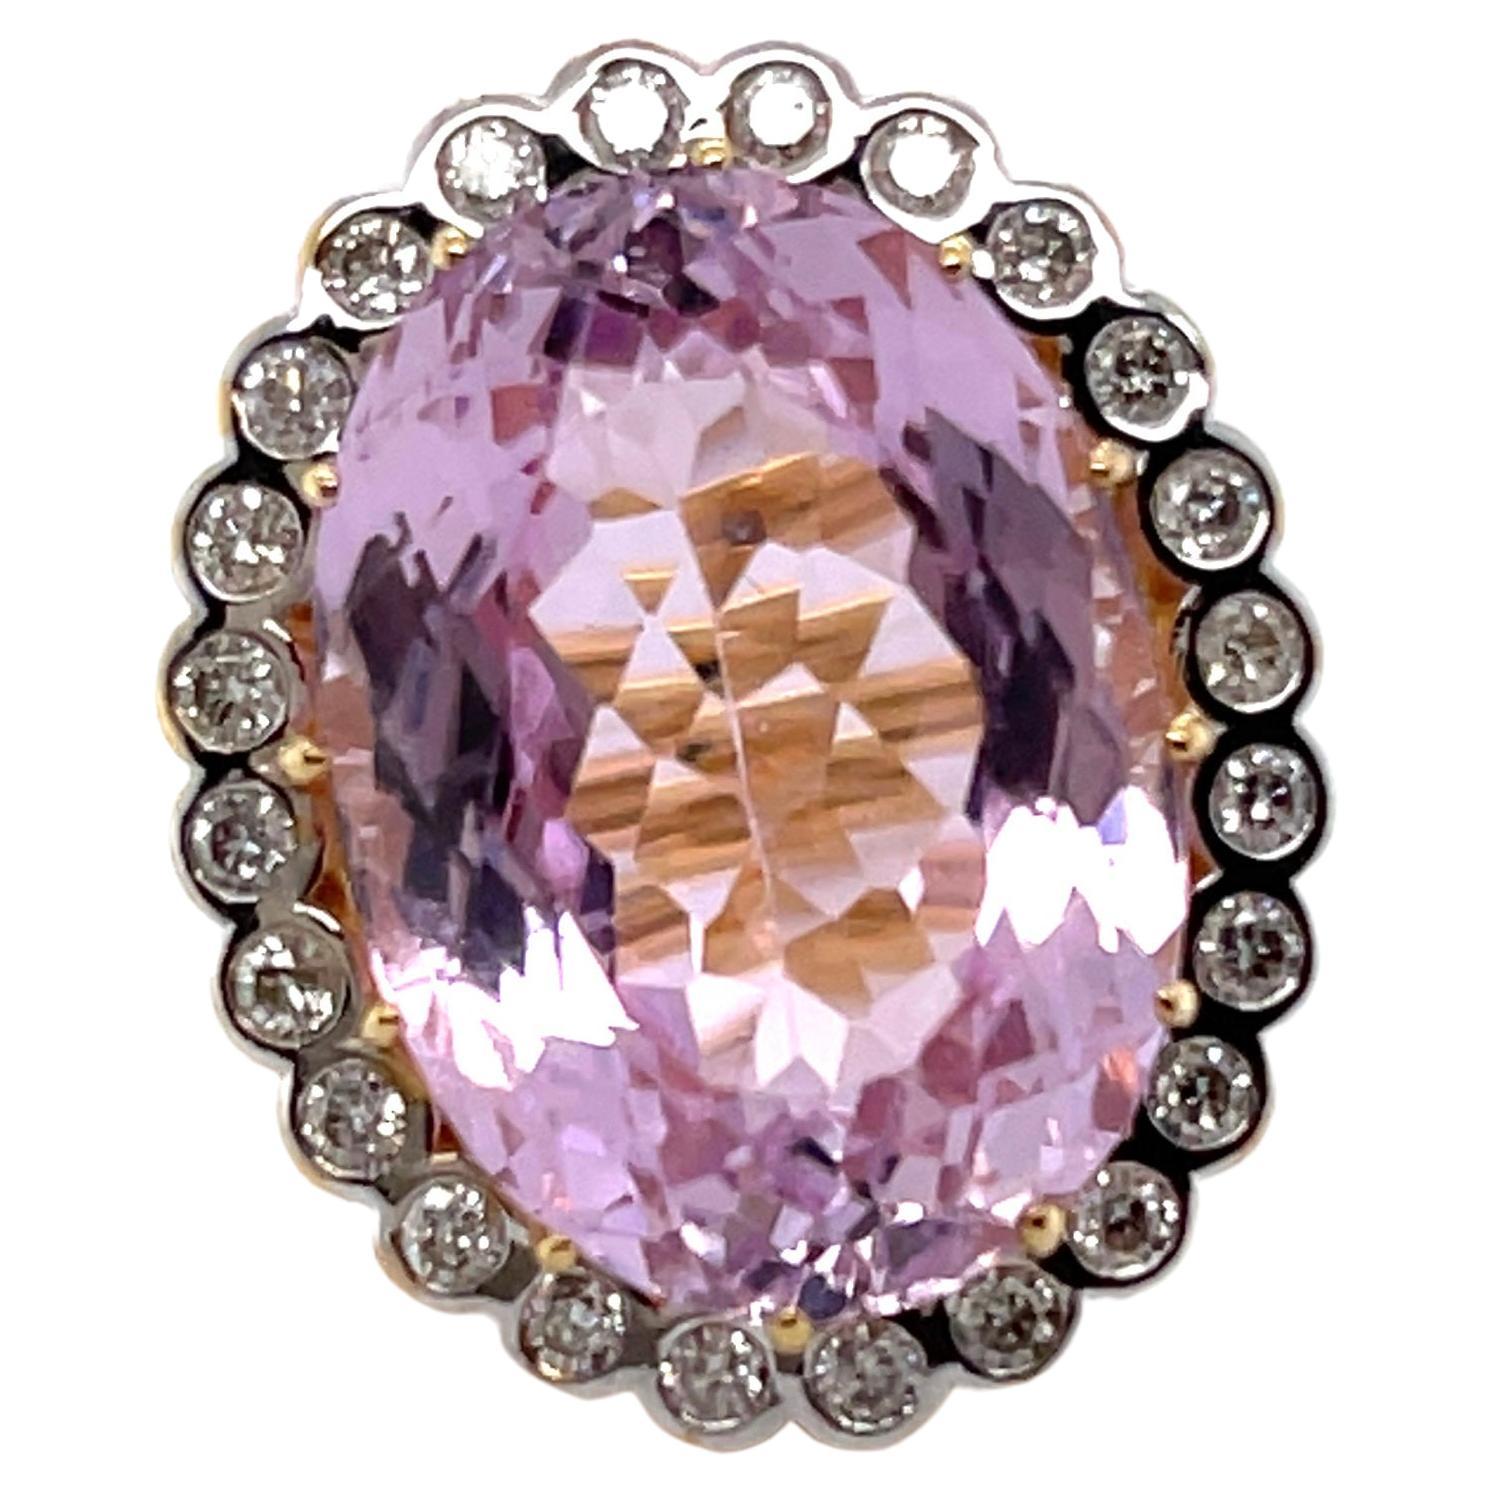 For Sale:  18ct Yellow Gold Pink Violet Kunzite Spodumene and Diamond Ring